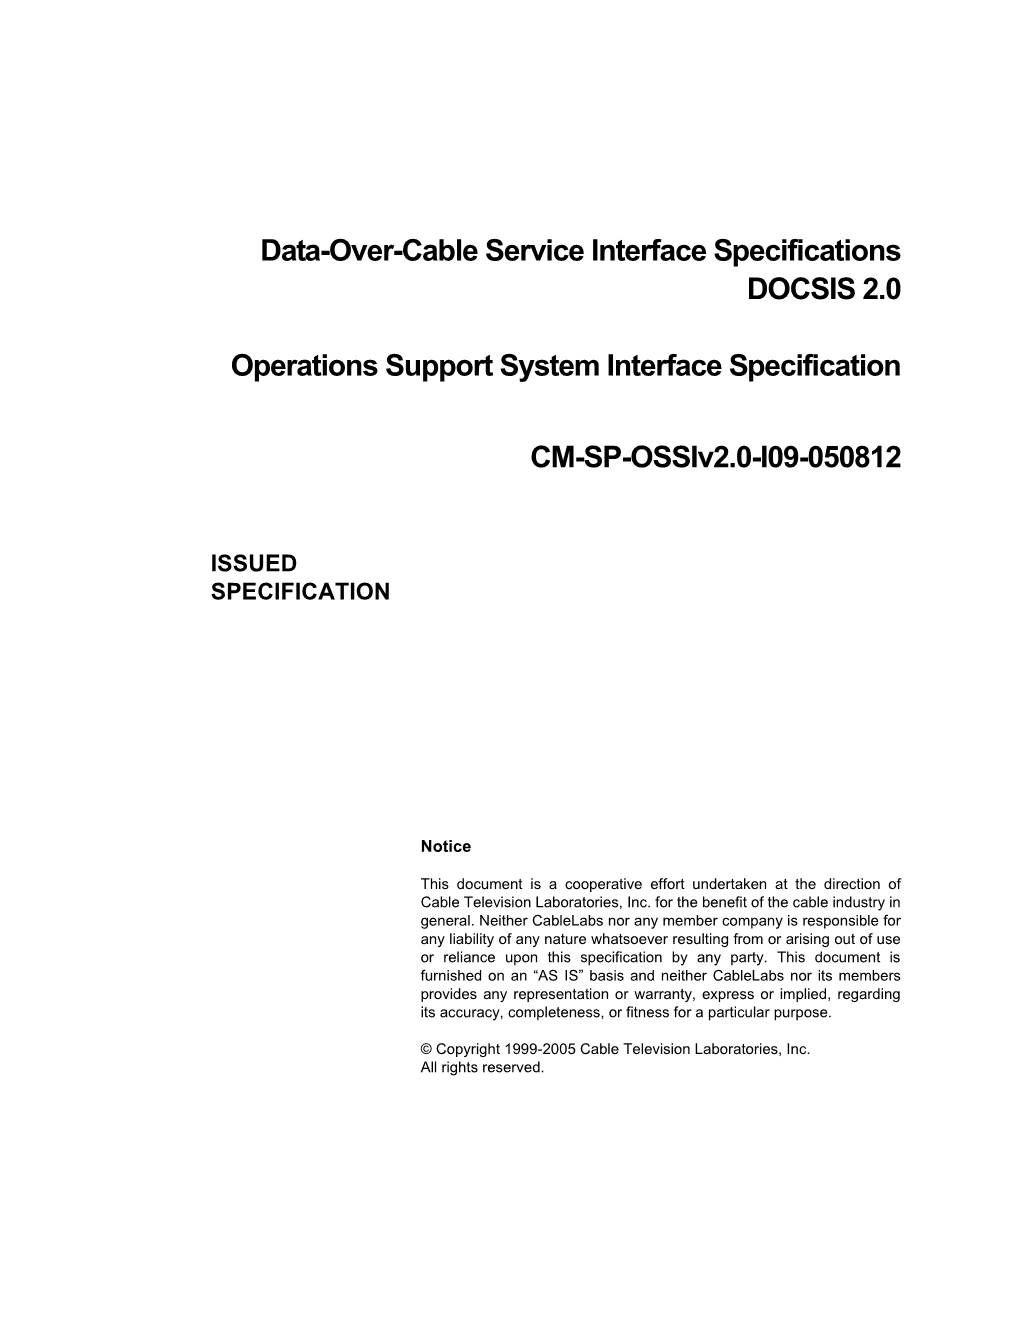 Data-Over-Cable Service Interface Specifications DOCSIS 2.0 Operations Support System Interface Specification (CM-SP-Ossiv2.0-I0